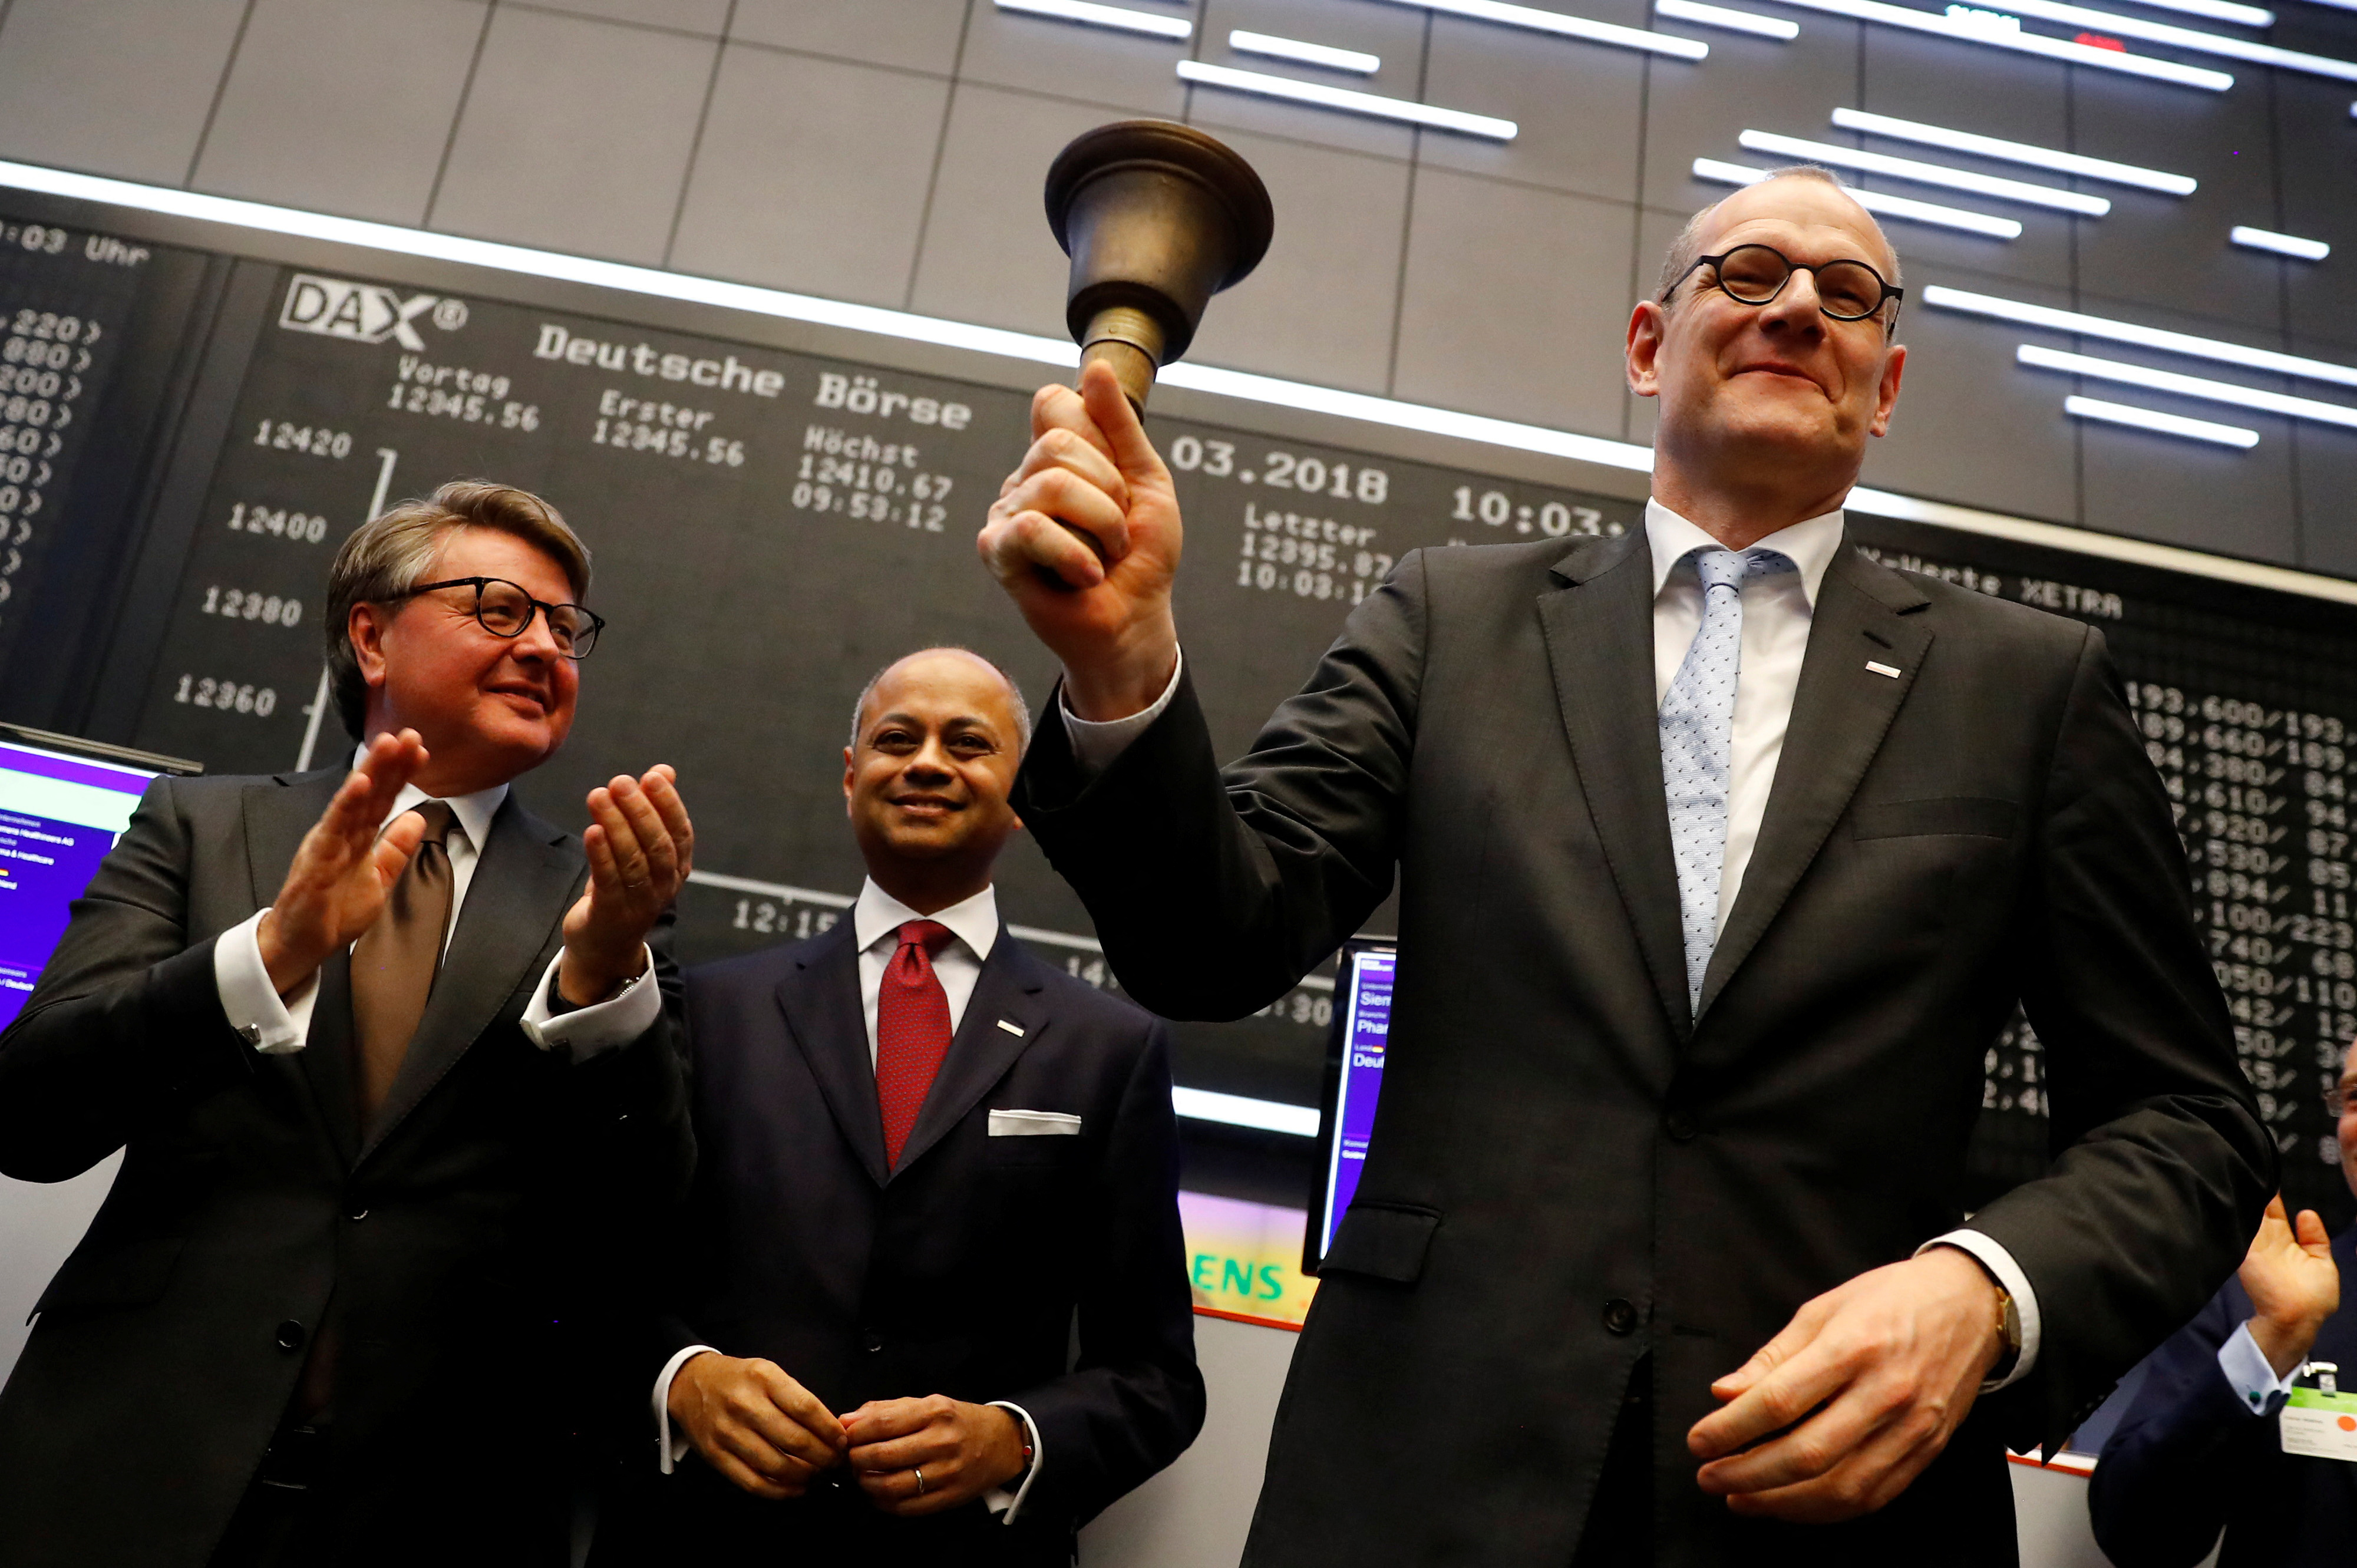 Bernd Montag, CEO of Siemens Healthineers rings the bell for the official share trading start following an initial public offering (IPO) at the trading floor of Frankfurt’s stock exchange in Frankfurt